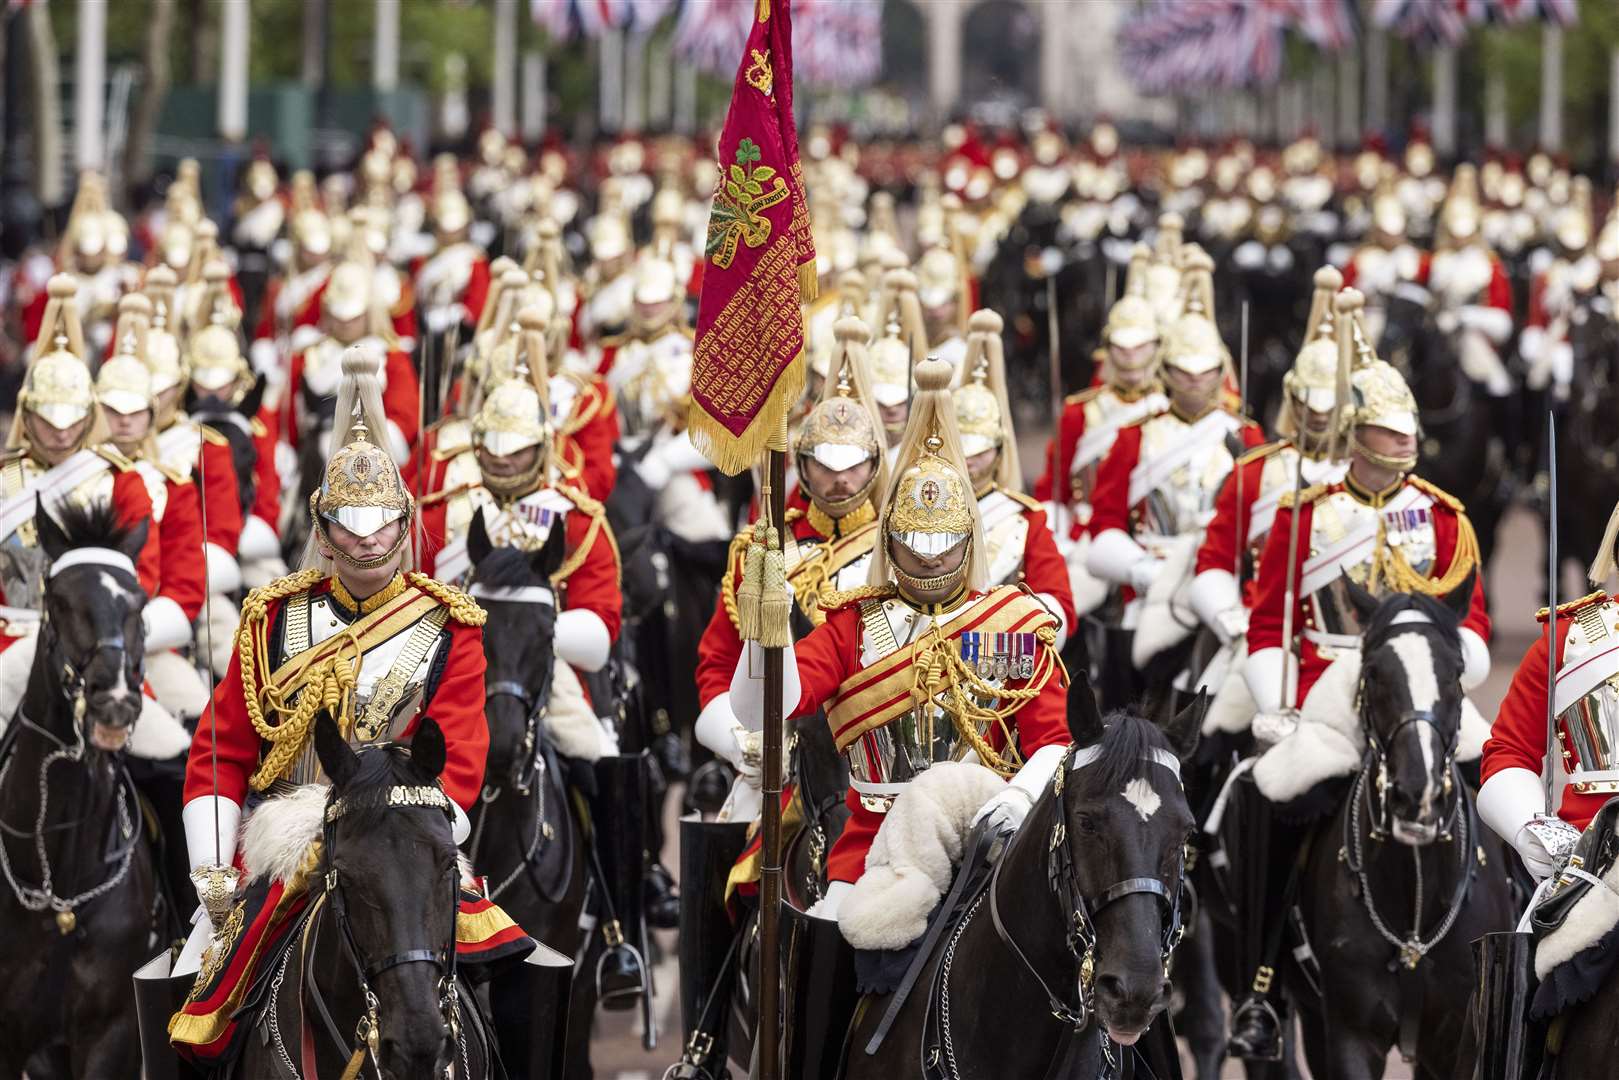 Traditional pageantry will be mixed in with a more modern take on the Coronation say officials. Image: MOD.